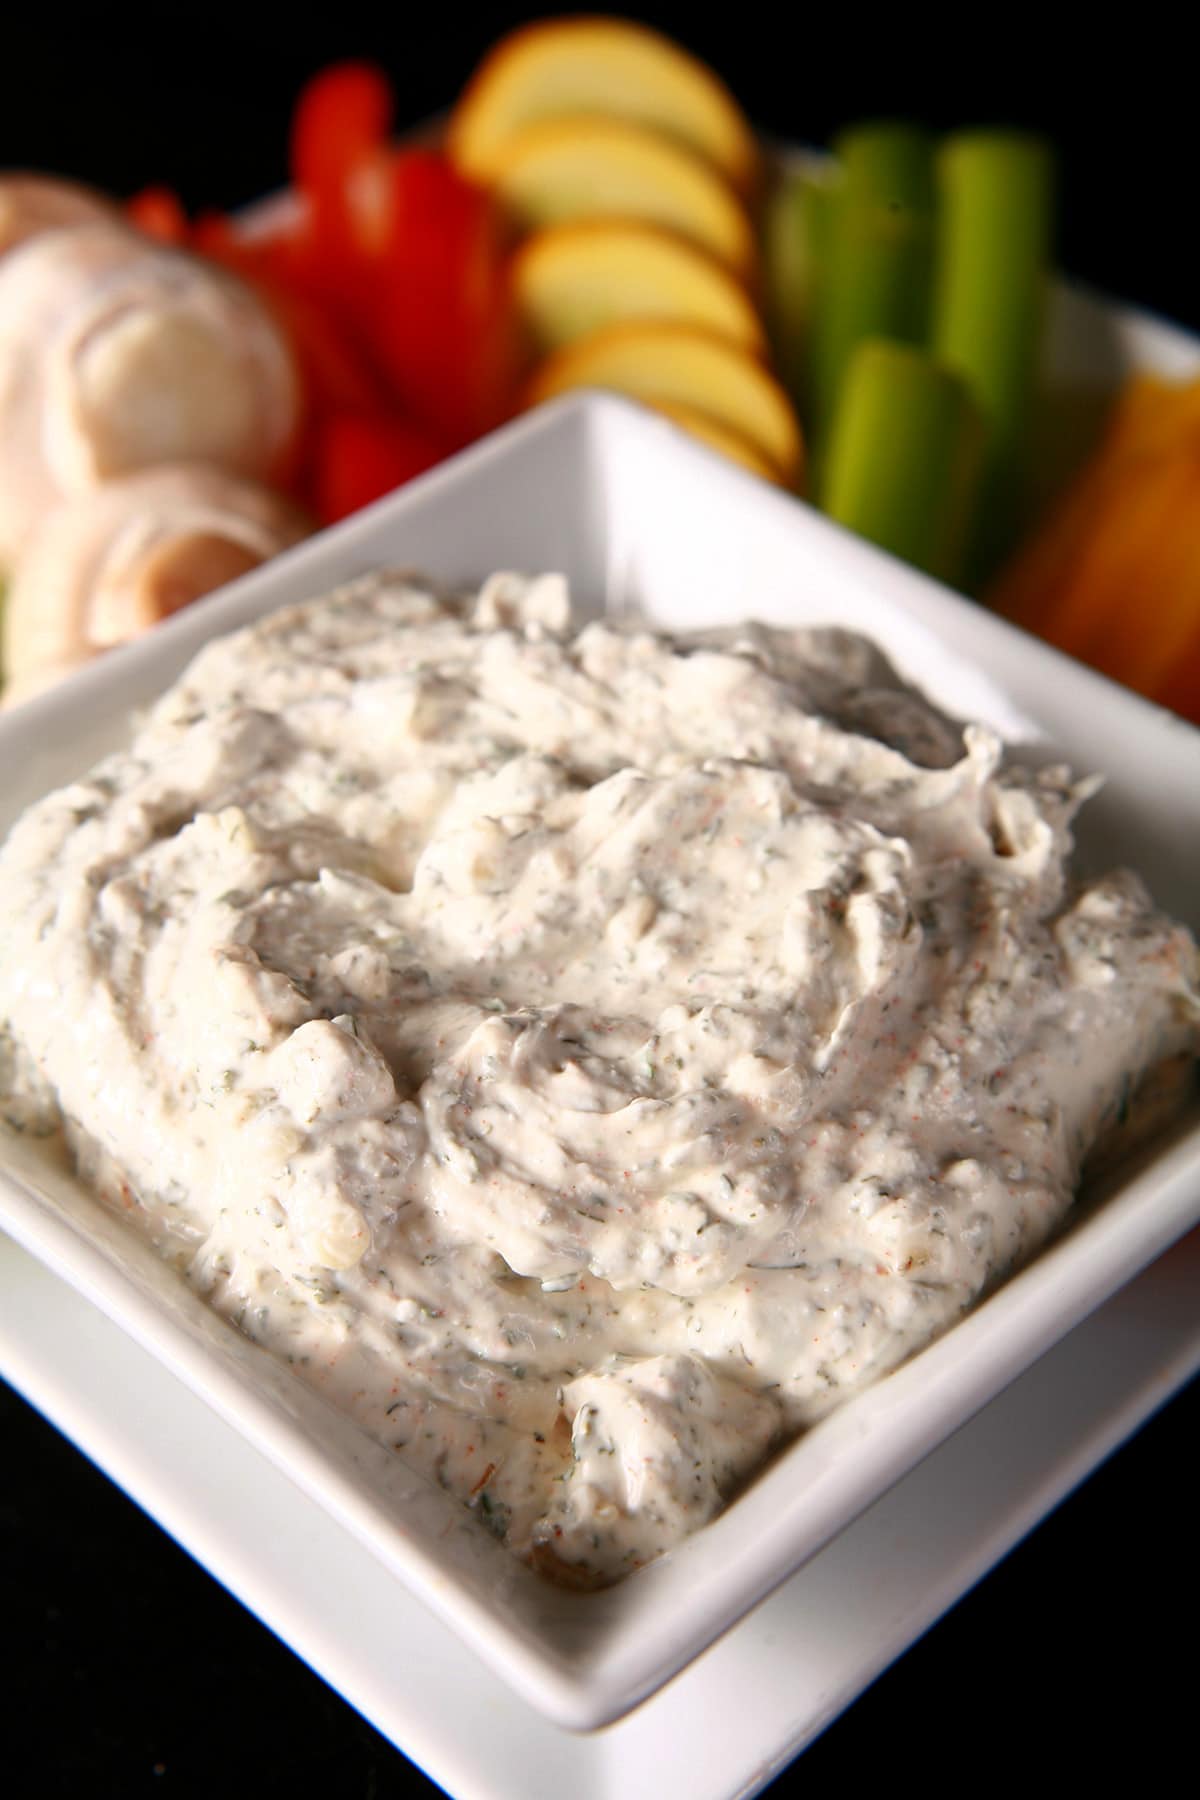 A close up view of a bowl of a thick veggie dip.  It is white with green flecks throughout.